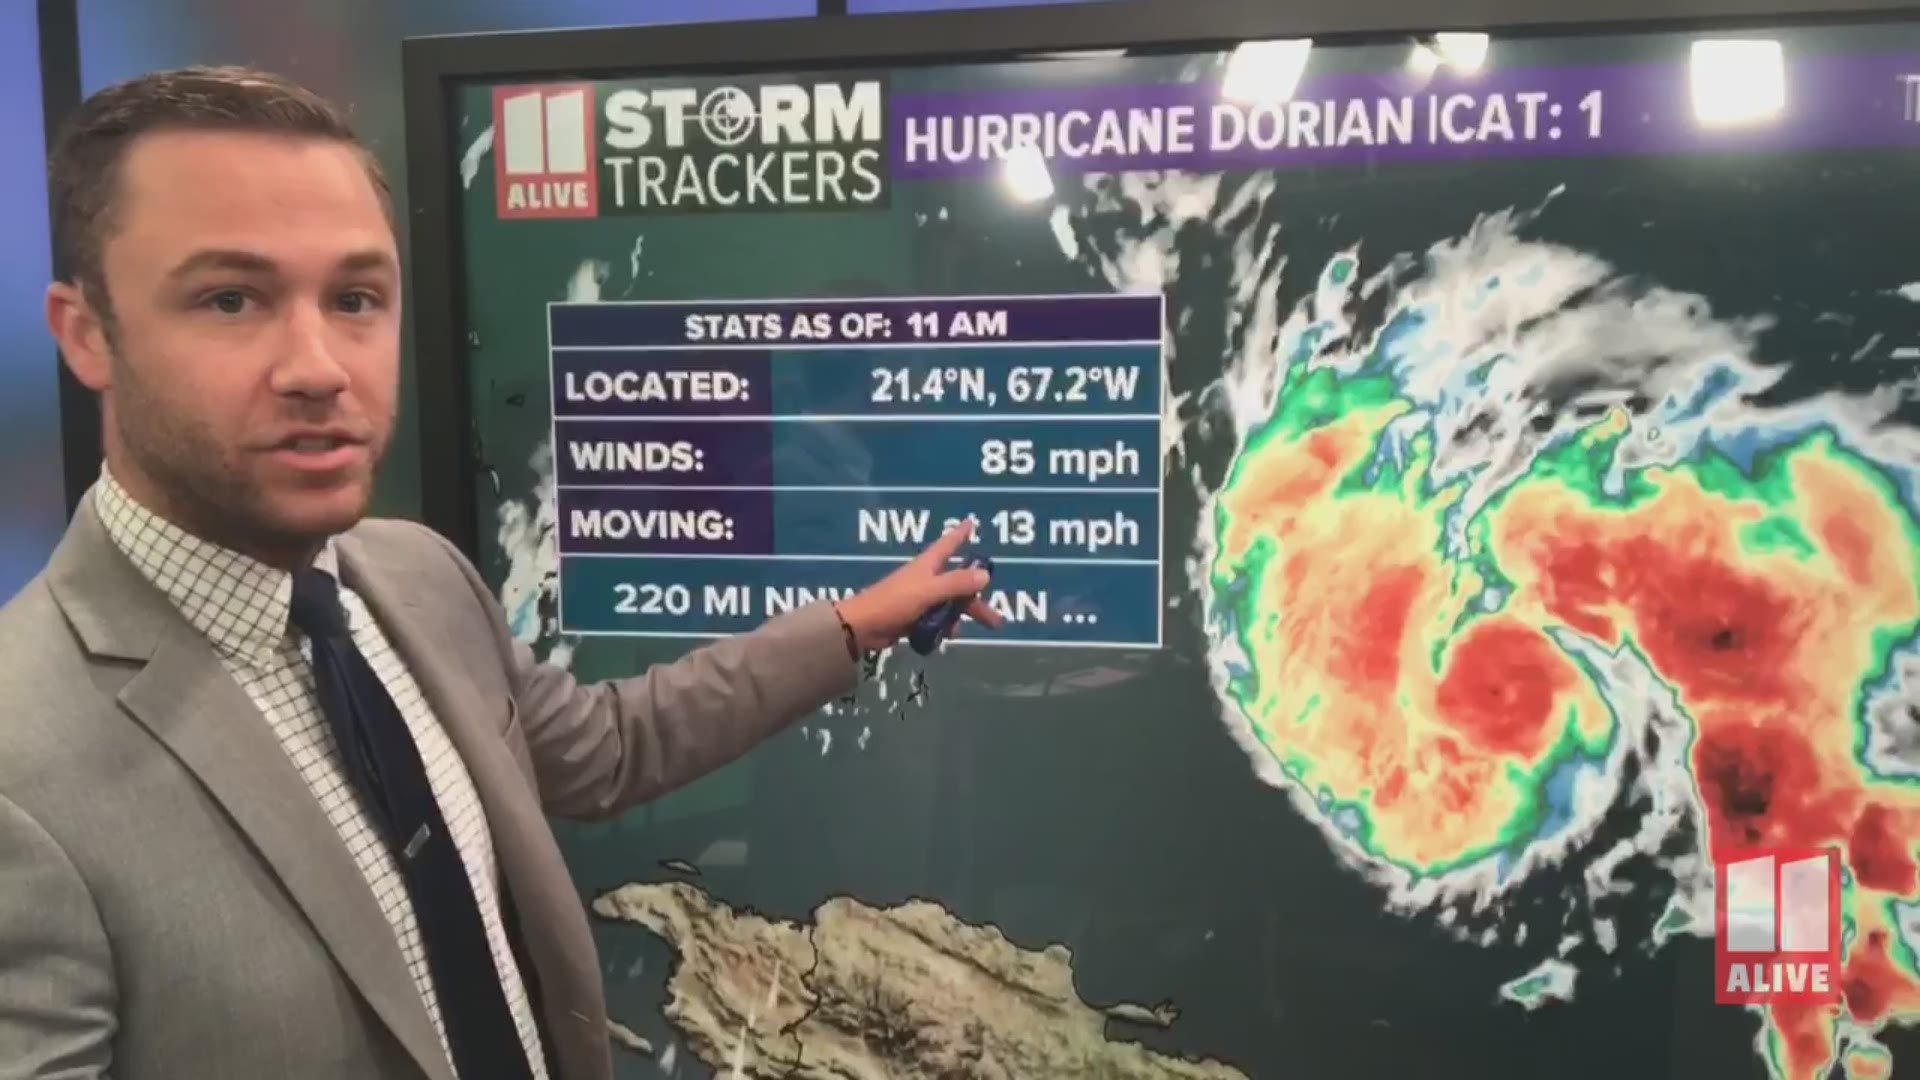 Dorian could be a major Category 4 hurricane before making impact. Here is the latest forecast path.